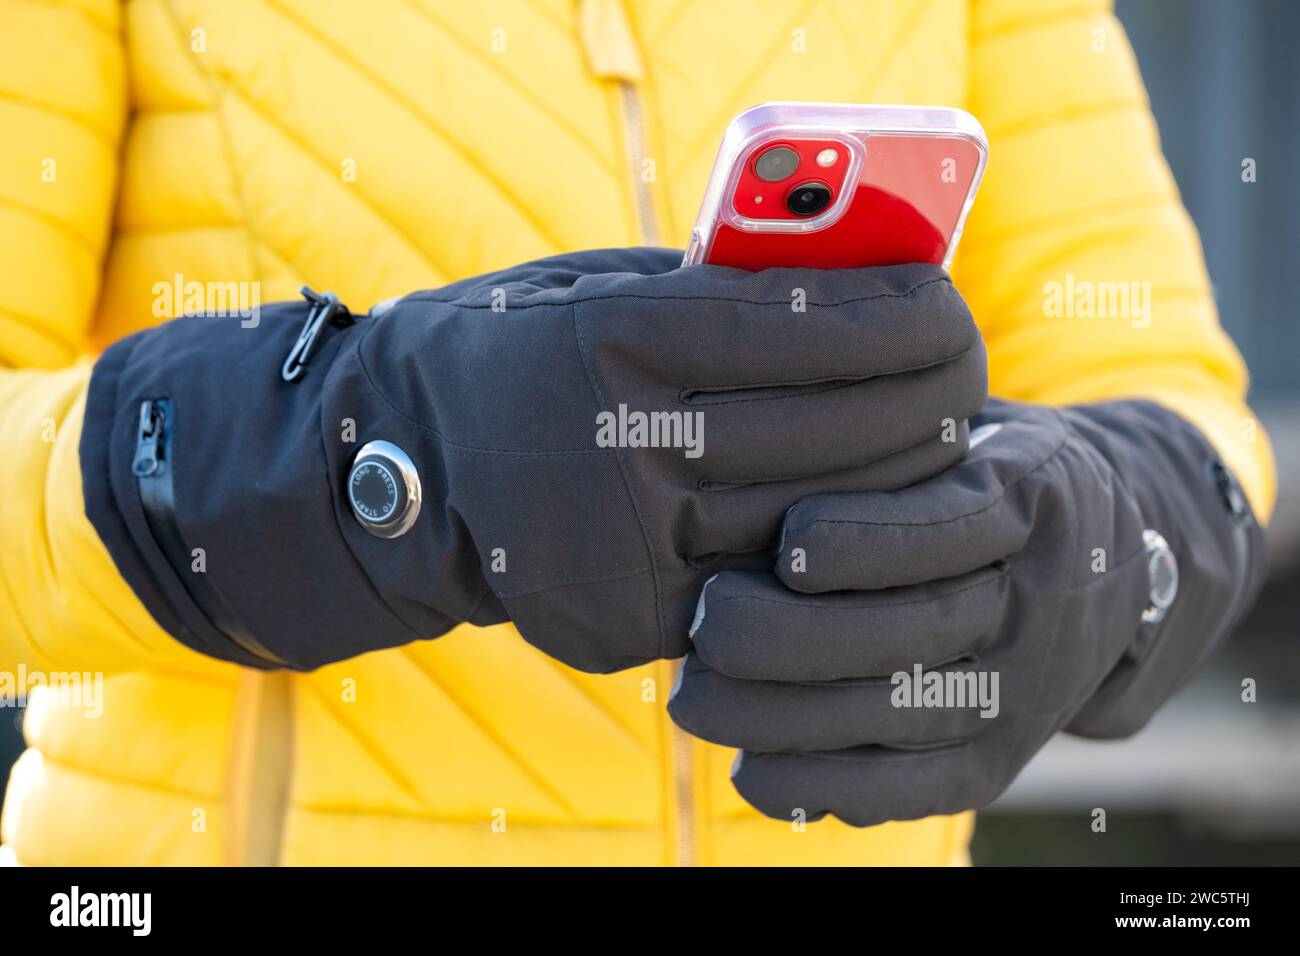 A woman wearing battery heated gloves during cold weather. The gloves have variable heat settings and help those suffering with Reynauds Disease Stock Photo